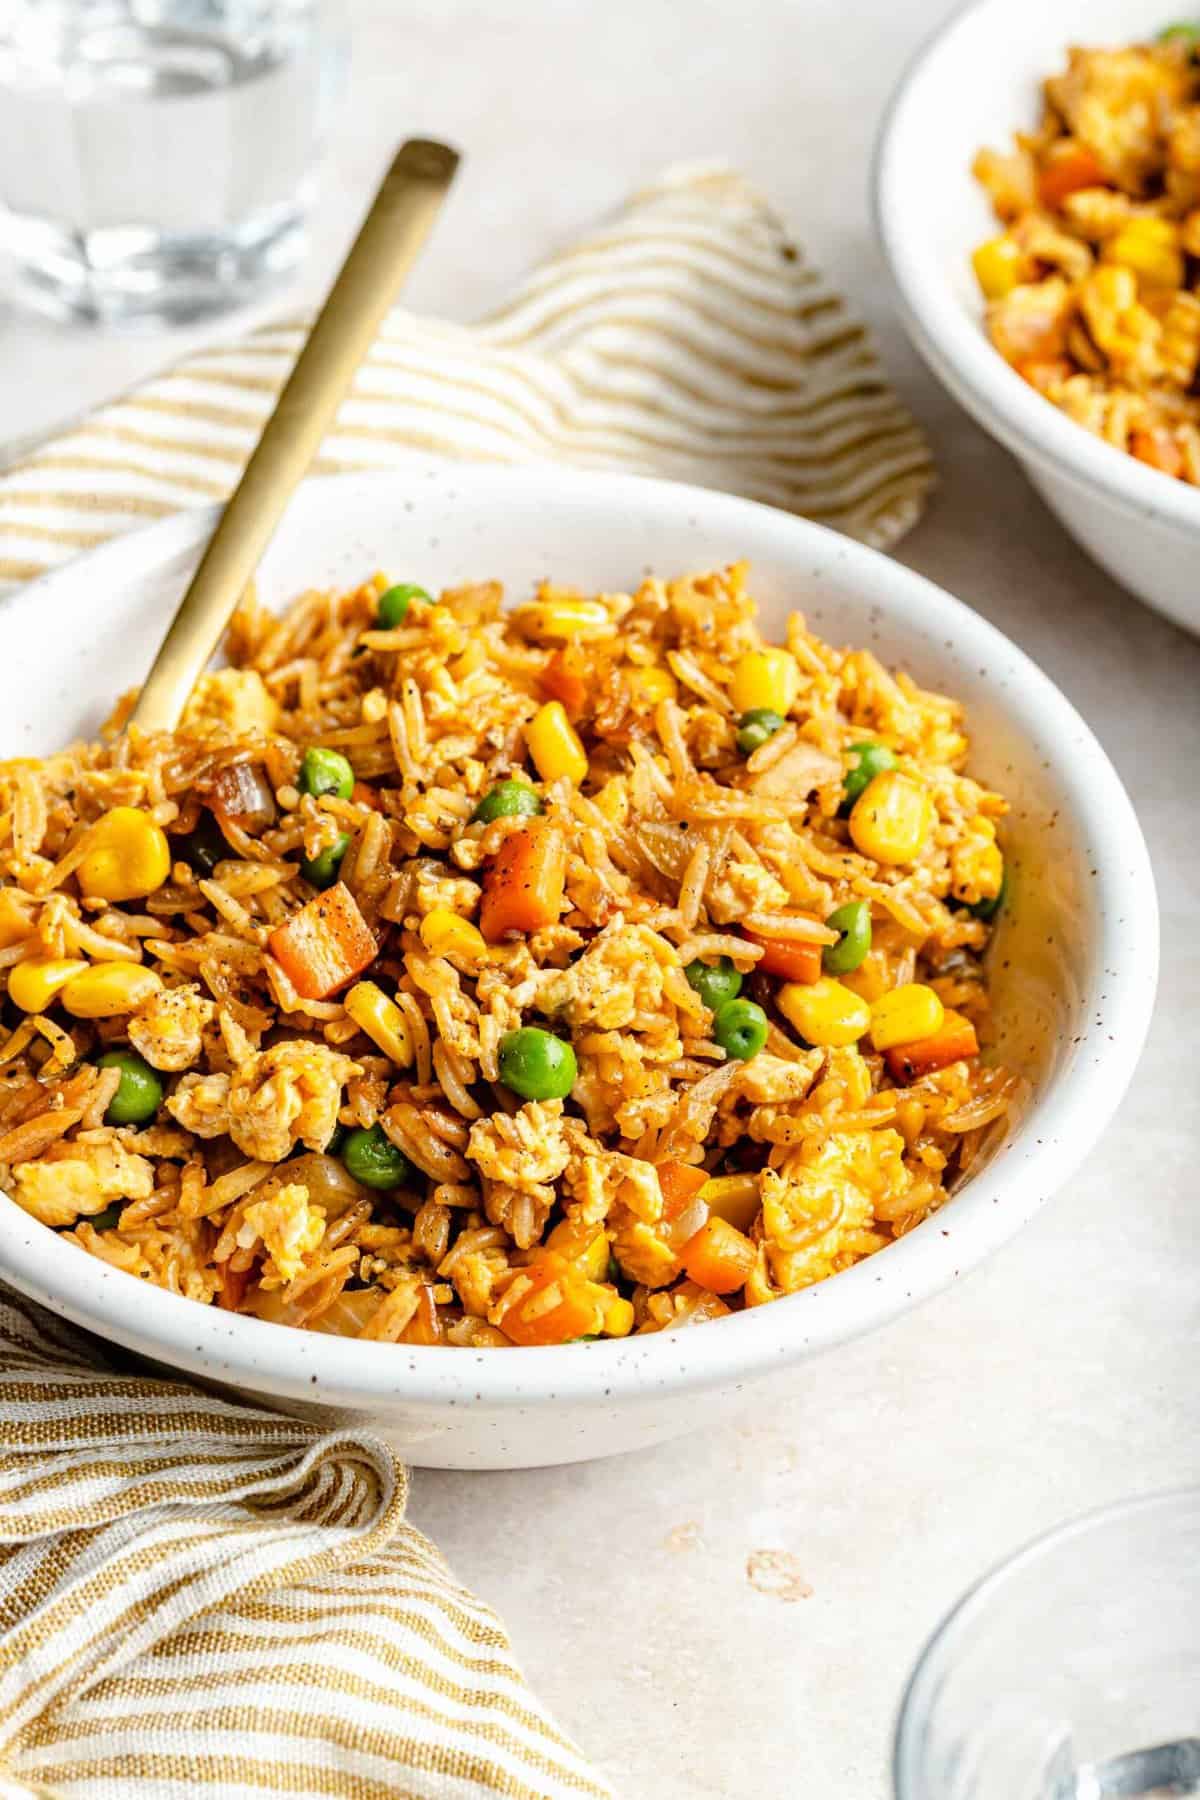 Vegetable fried rice in a bowl.